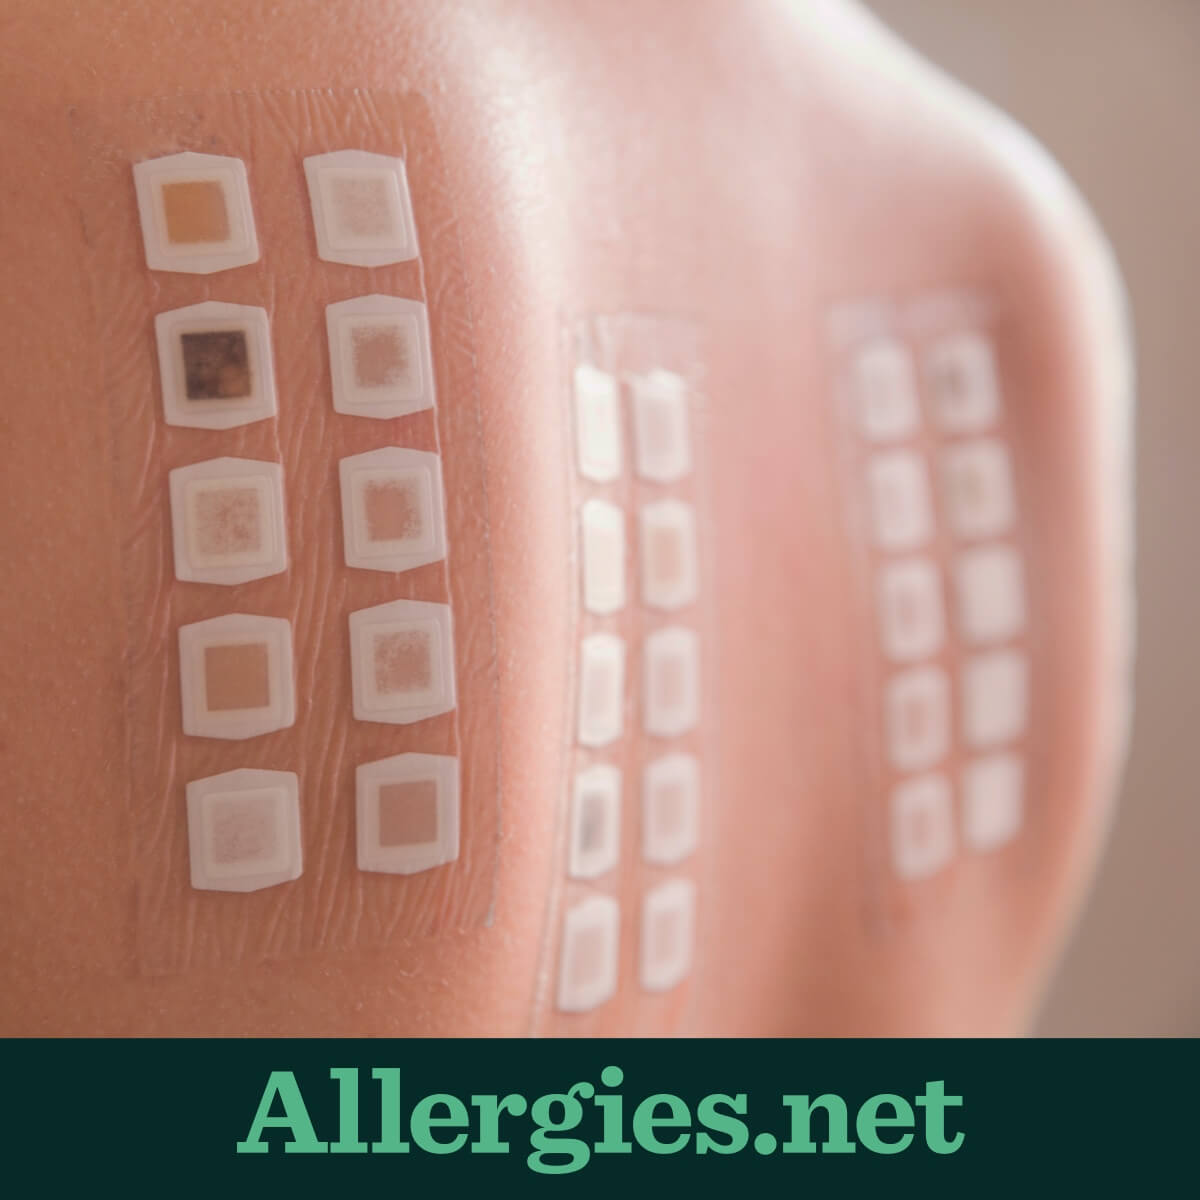 With a patch test, a tiny amount of allergen is placed on the skin, then covered. The patch is left on for 2 days. Allergic reactions may develop between 2 and 7 days.